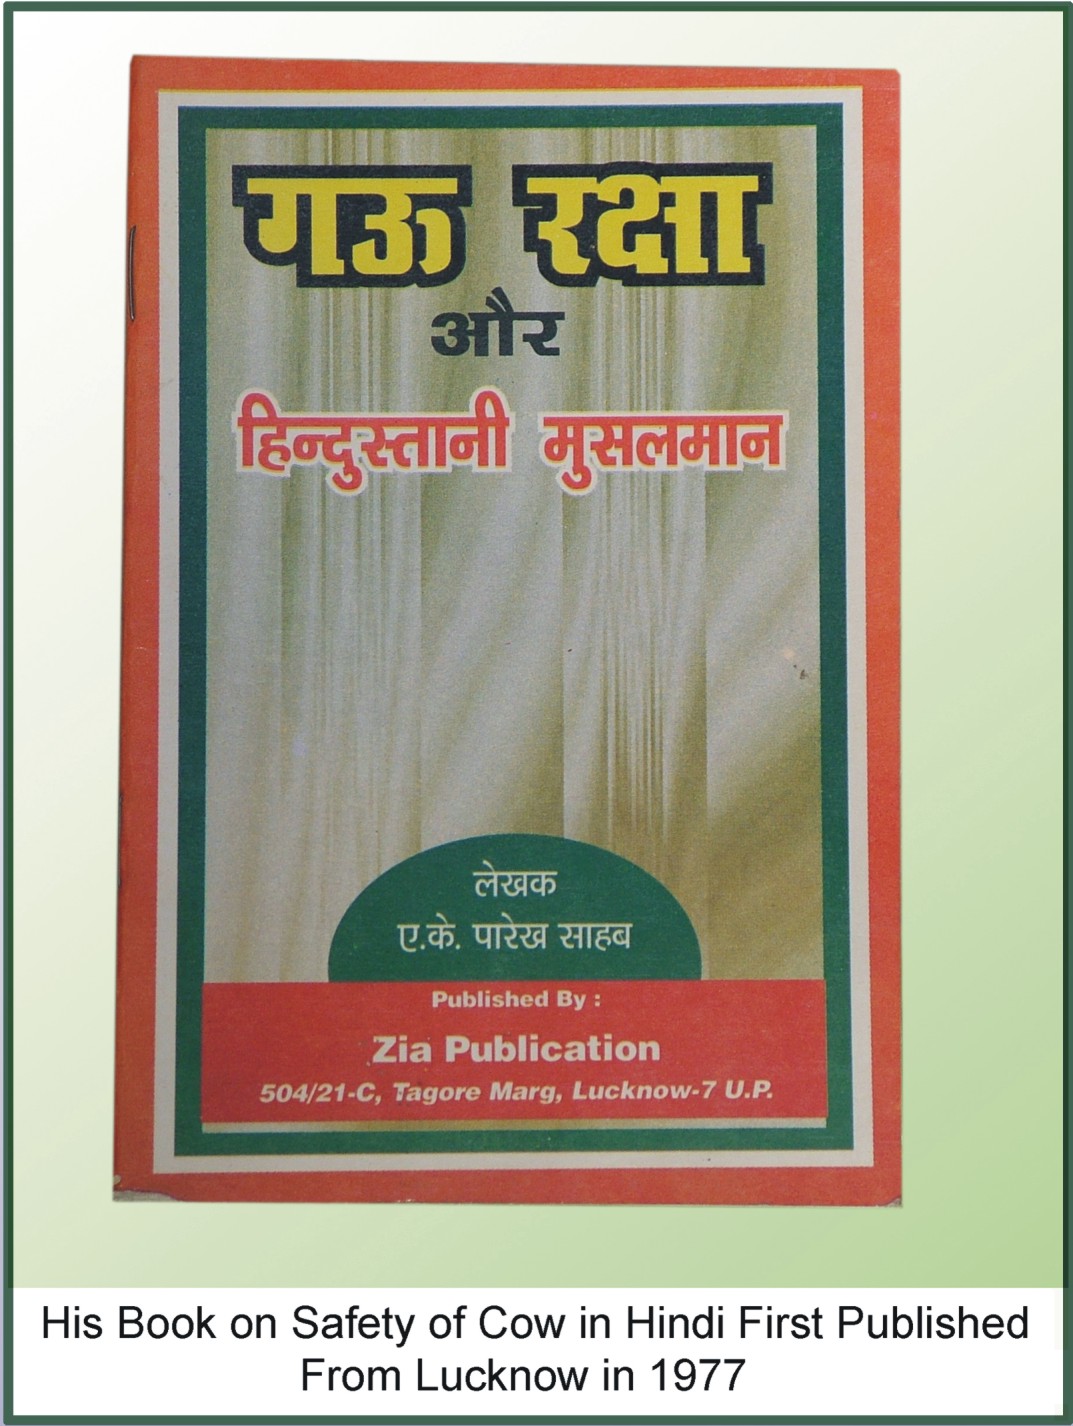 Safety of Cow (Hindi) First Published from Lucknow in 1977